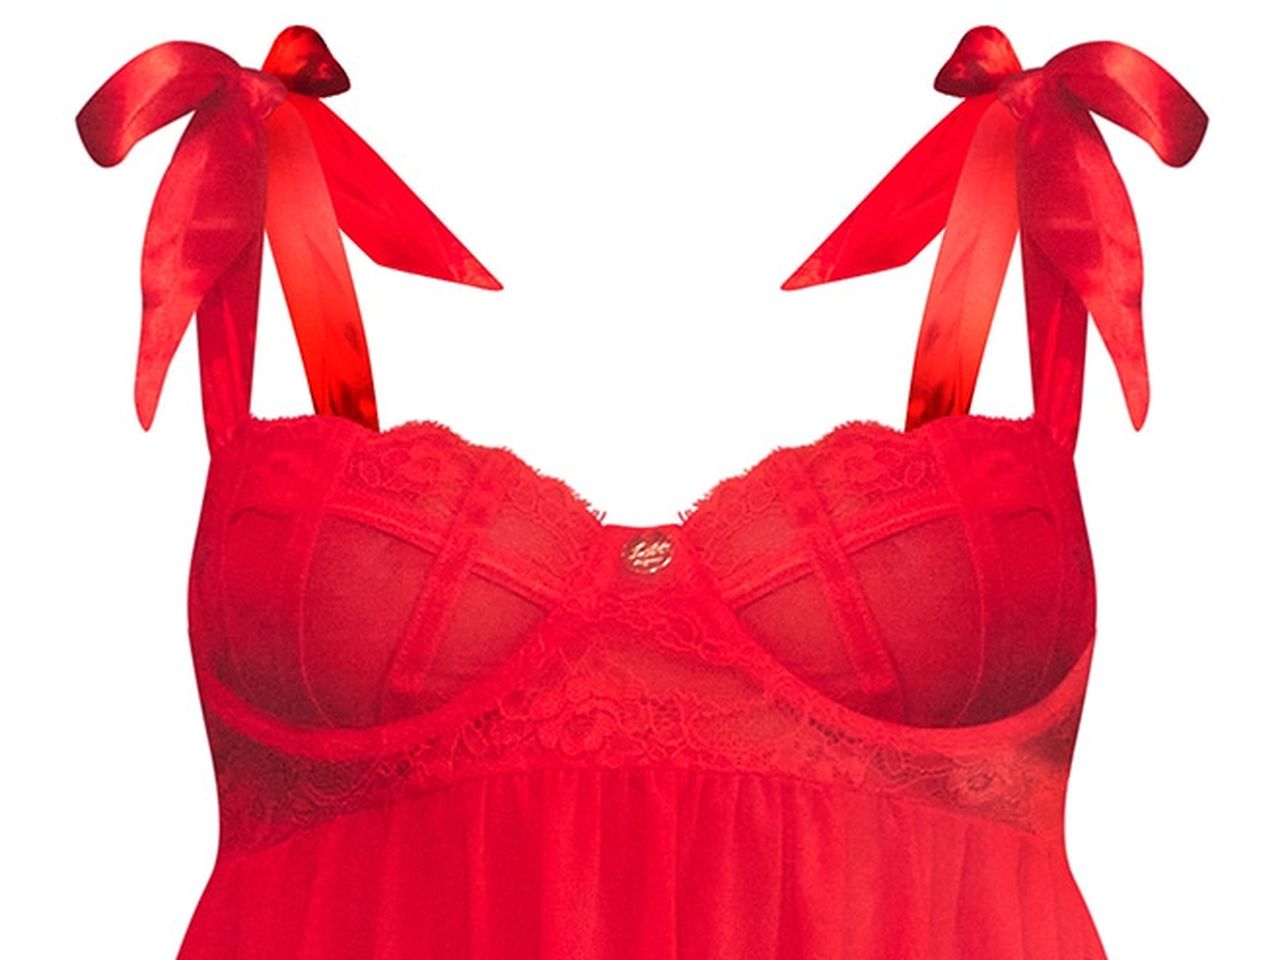 Boohoo is selling sexy lingerie just in time for Valentine's Day